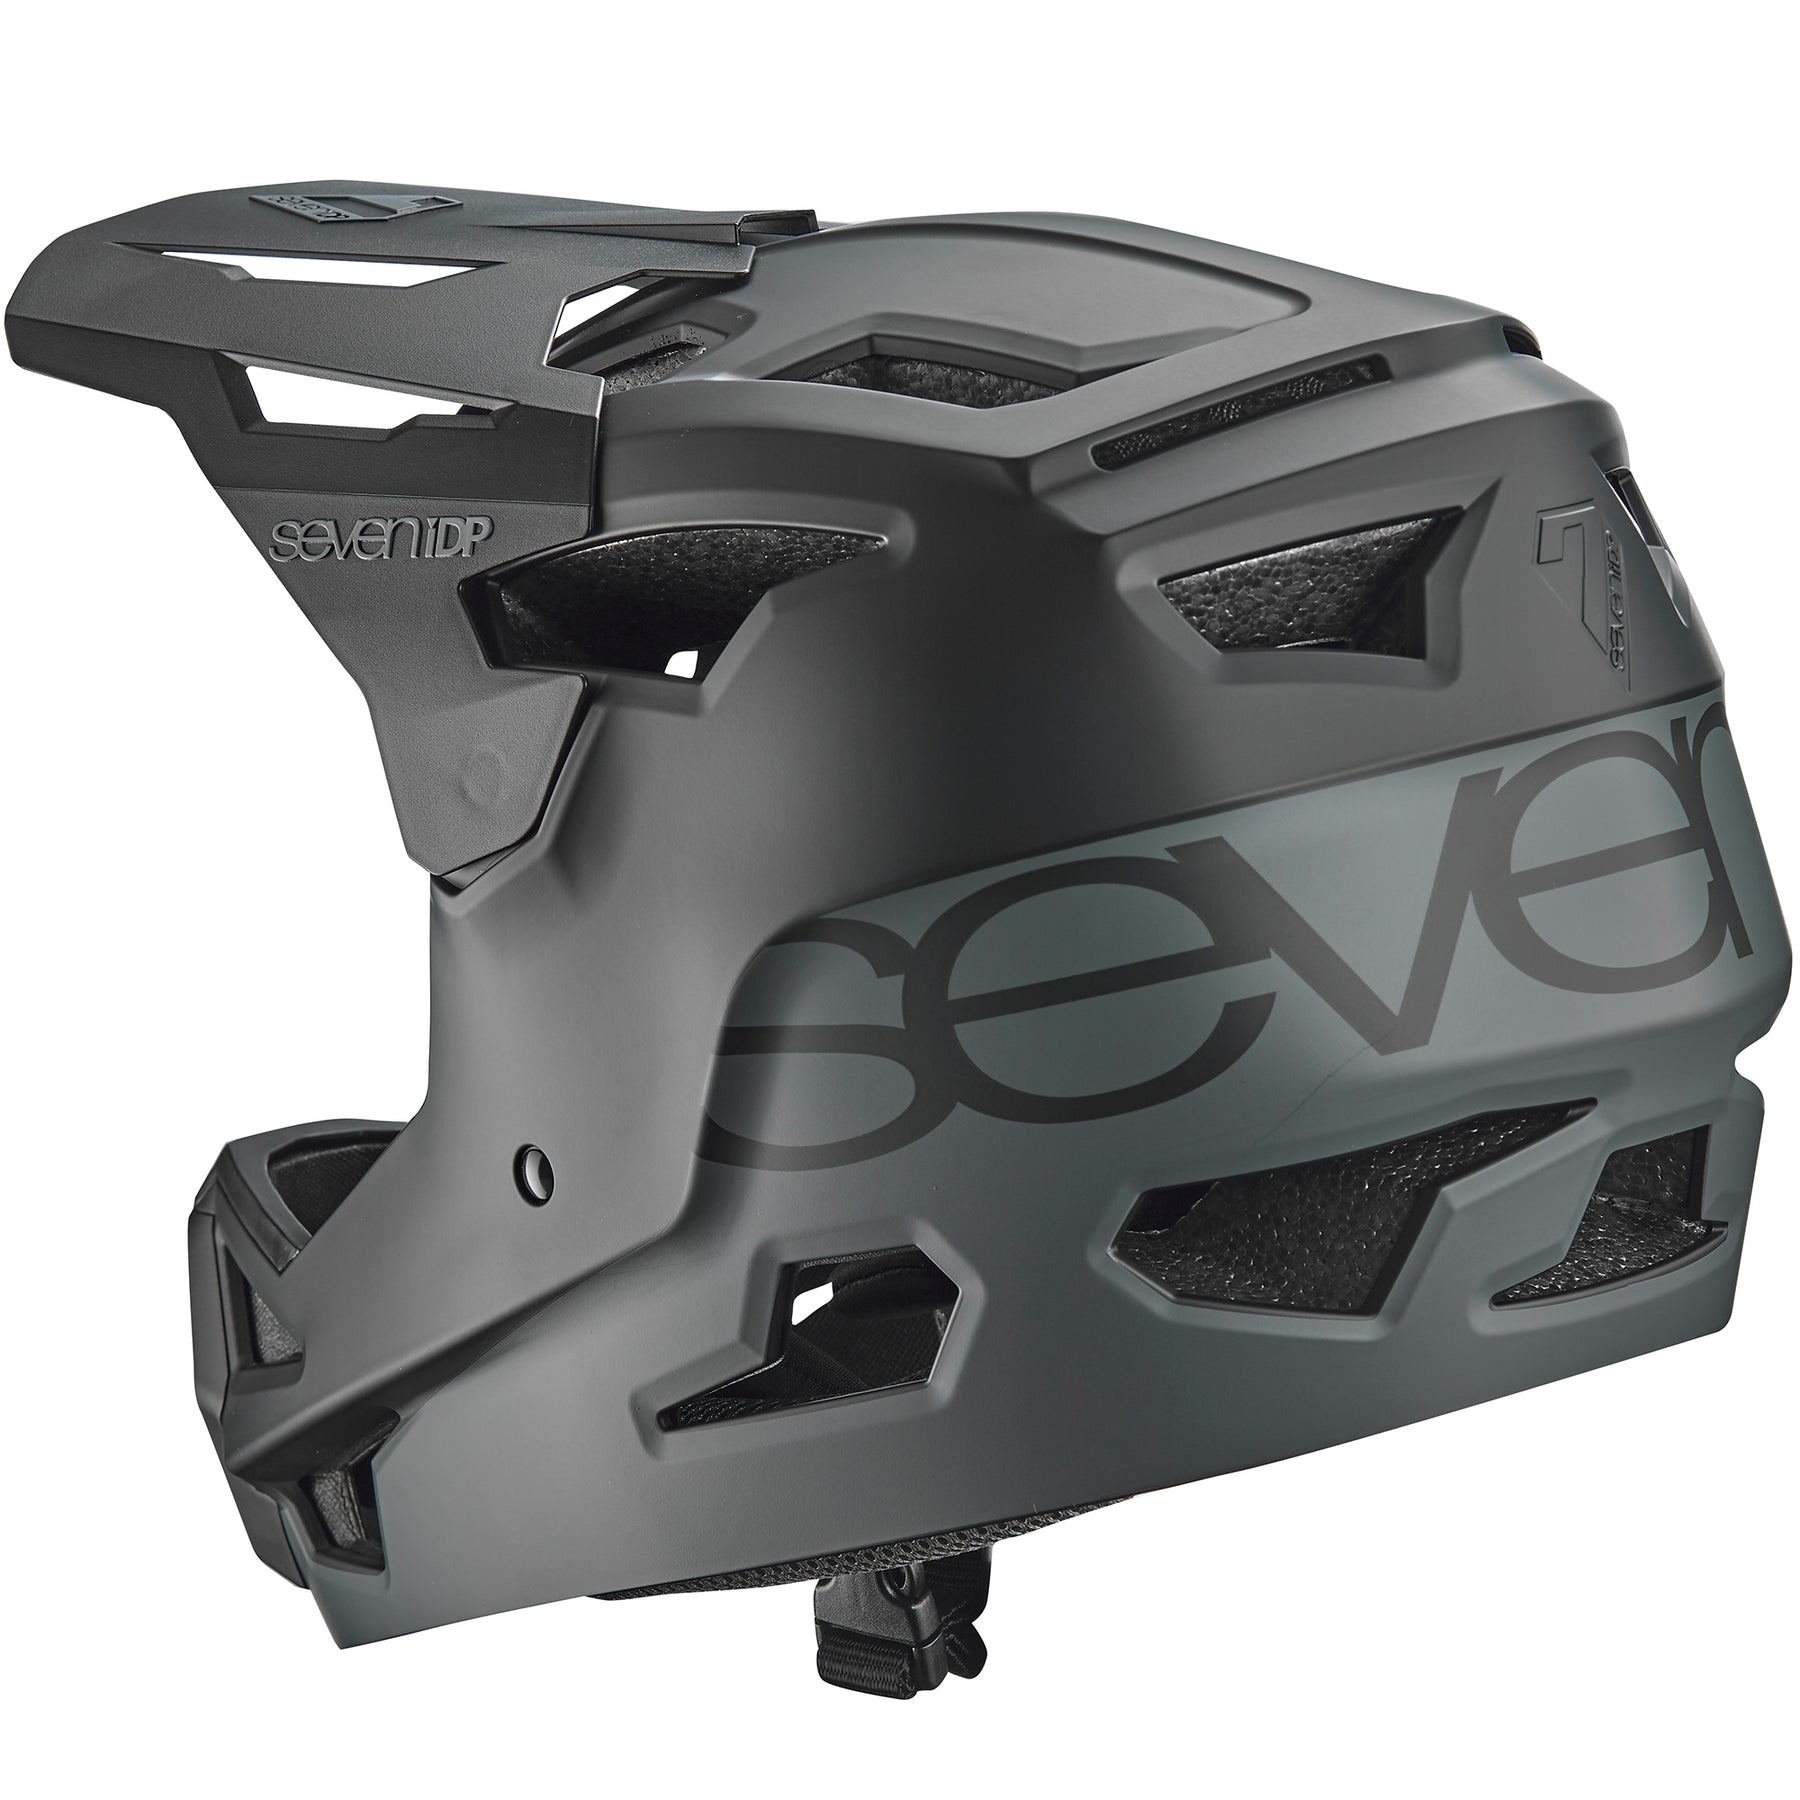 Casco Full-Face 7IDP PROJECT 23 - ABS NEGRO